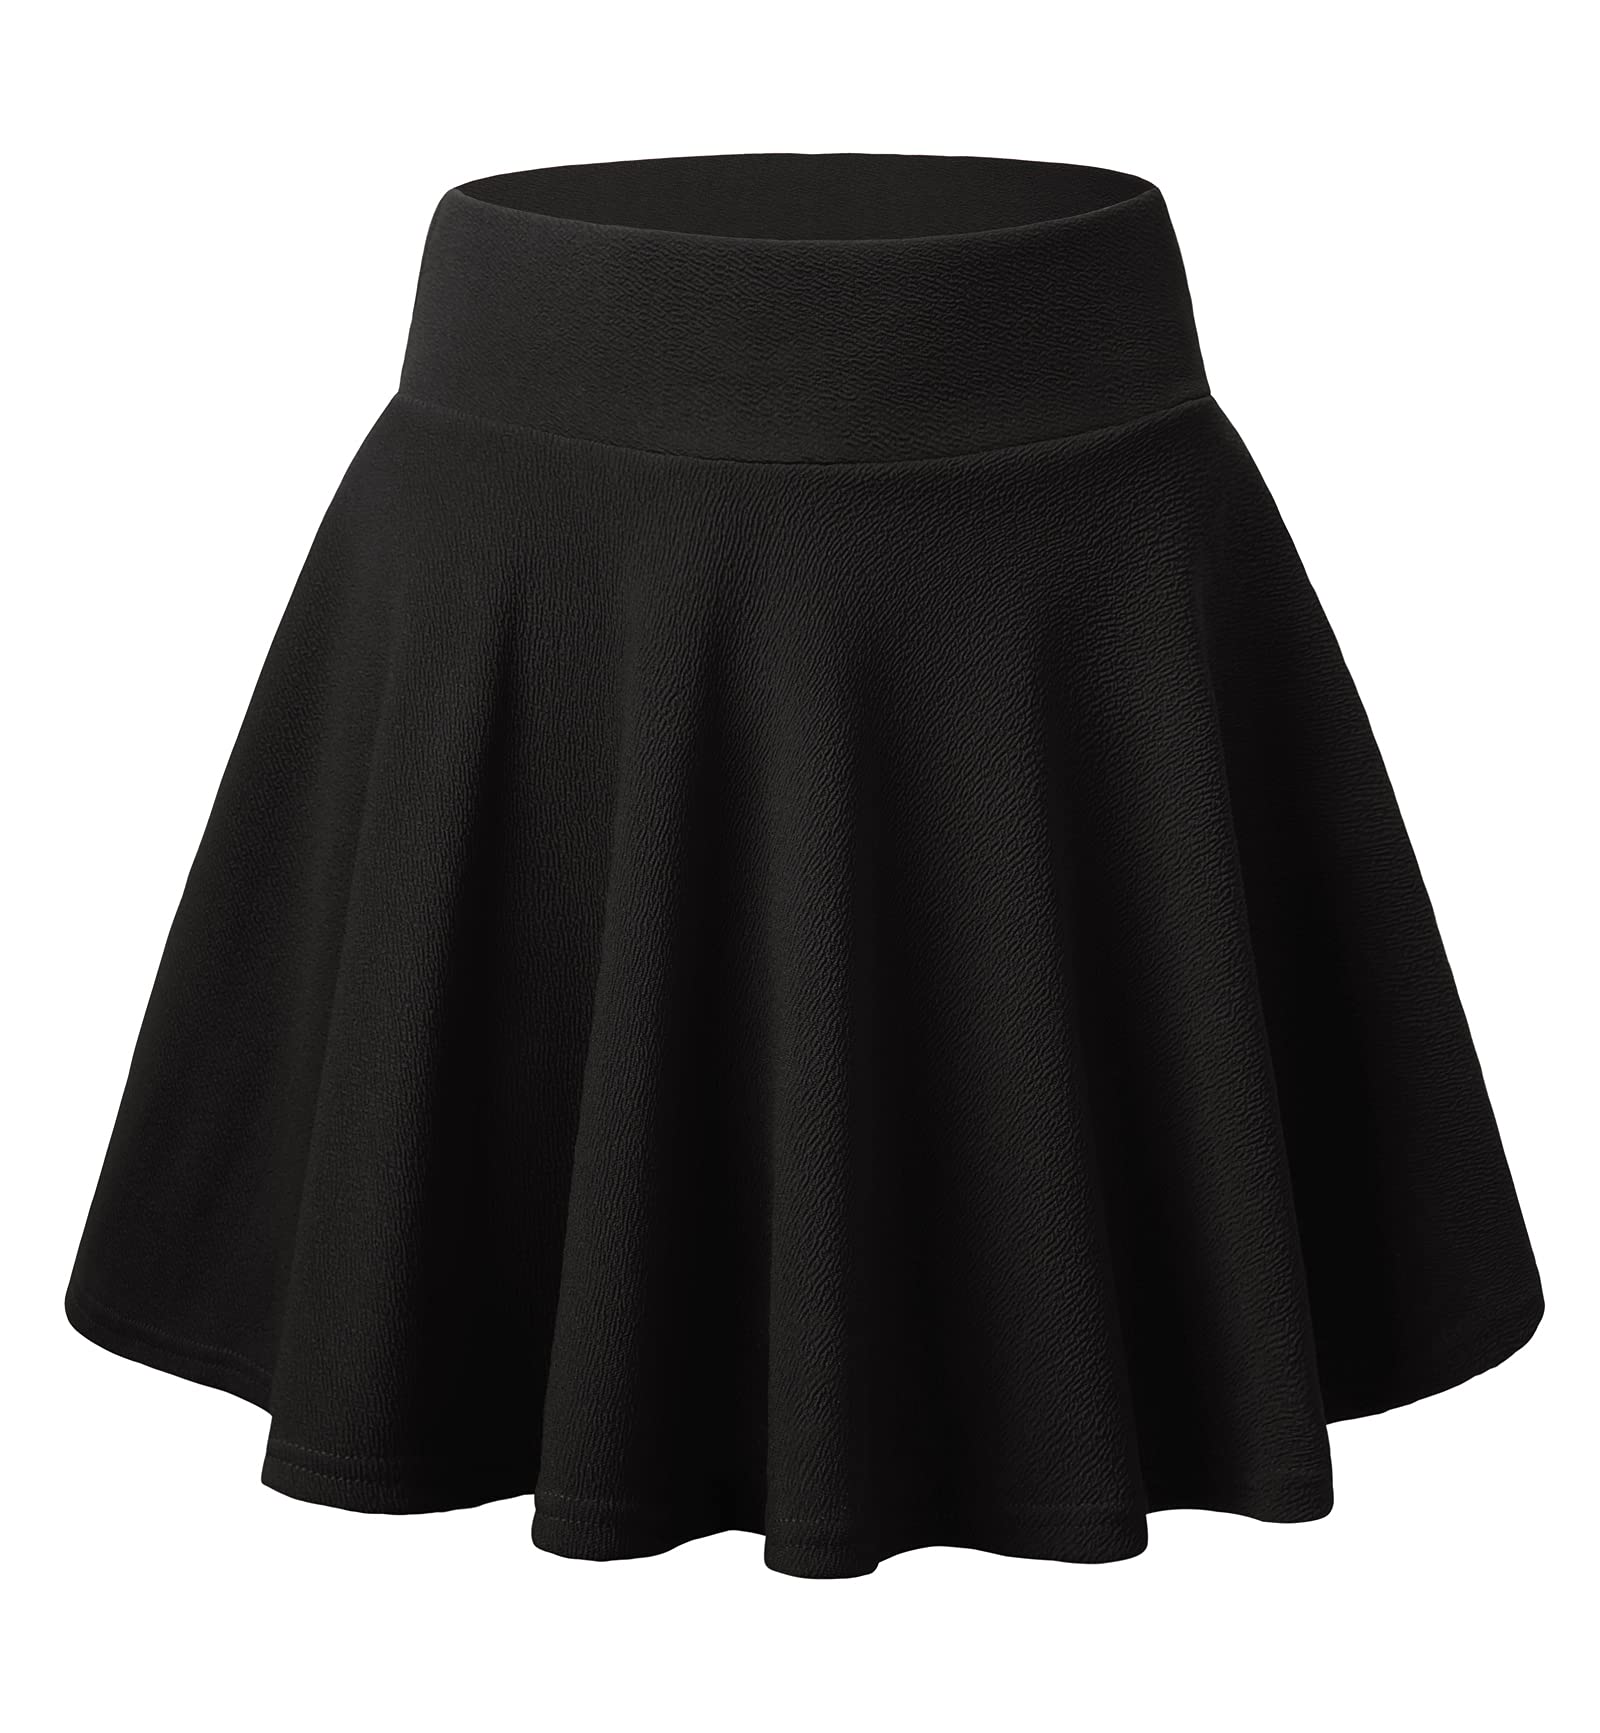 DJT Flared Pleated Women's Casual Stretchy Black Mini Skater Skirt with Shorts